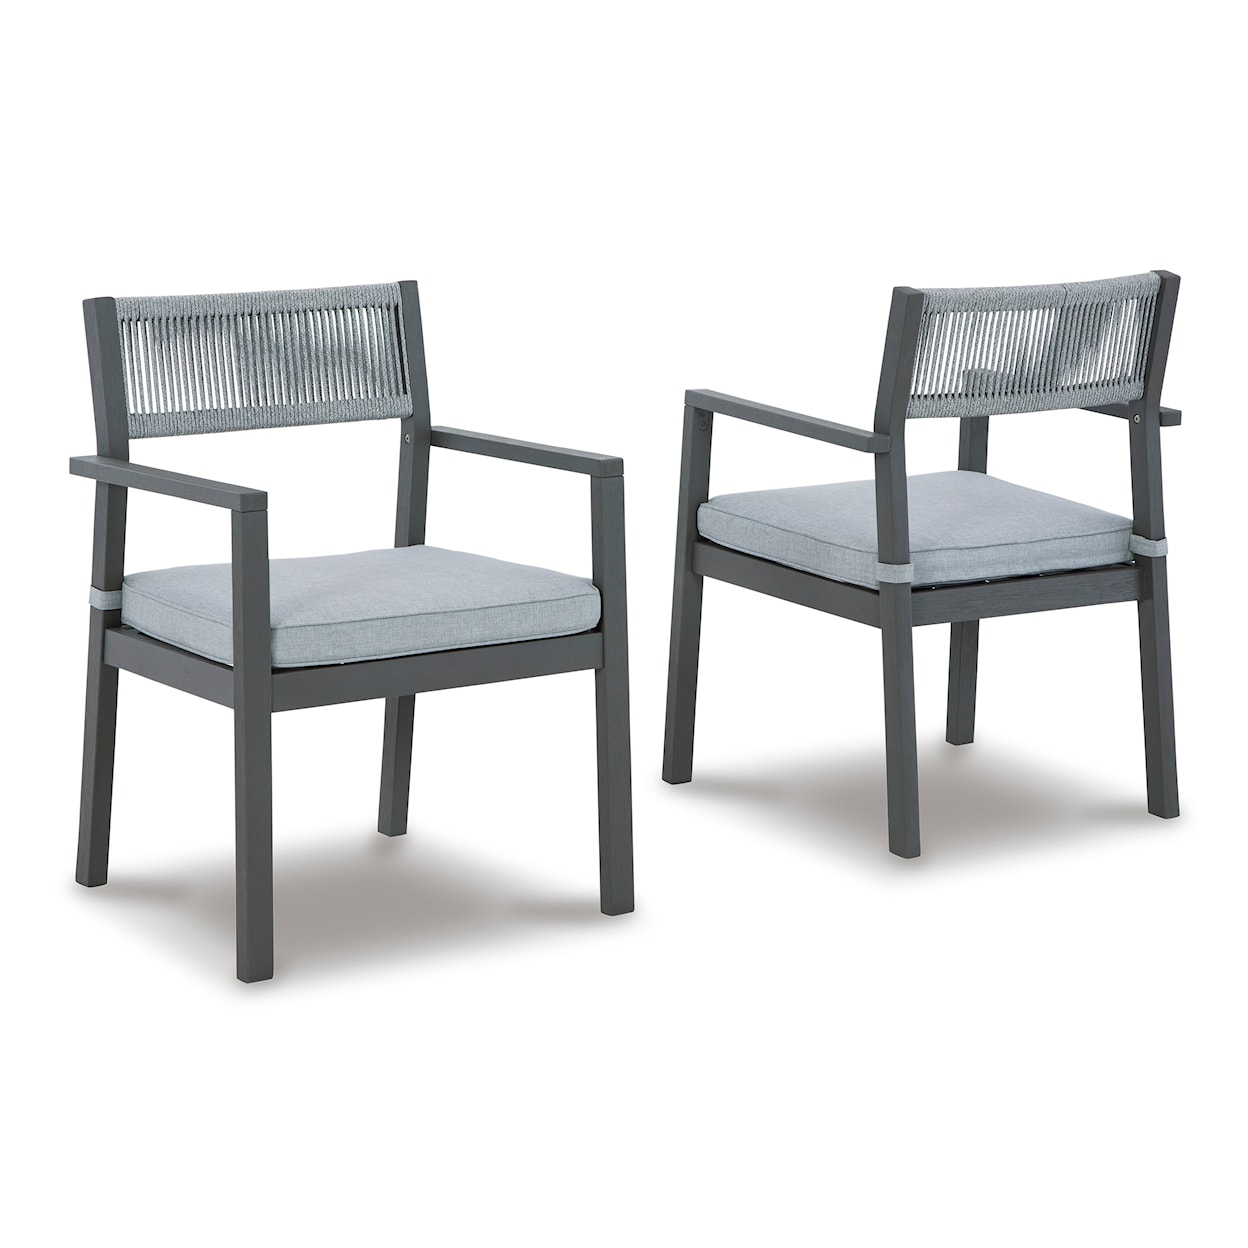 Signature Design by Ashley Eden Town Outdoor Dining Chair (Set of 2)